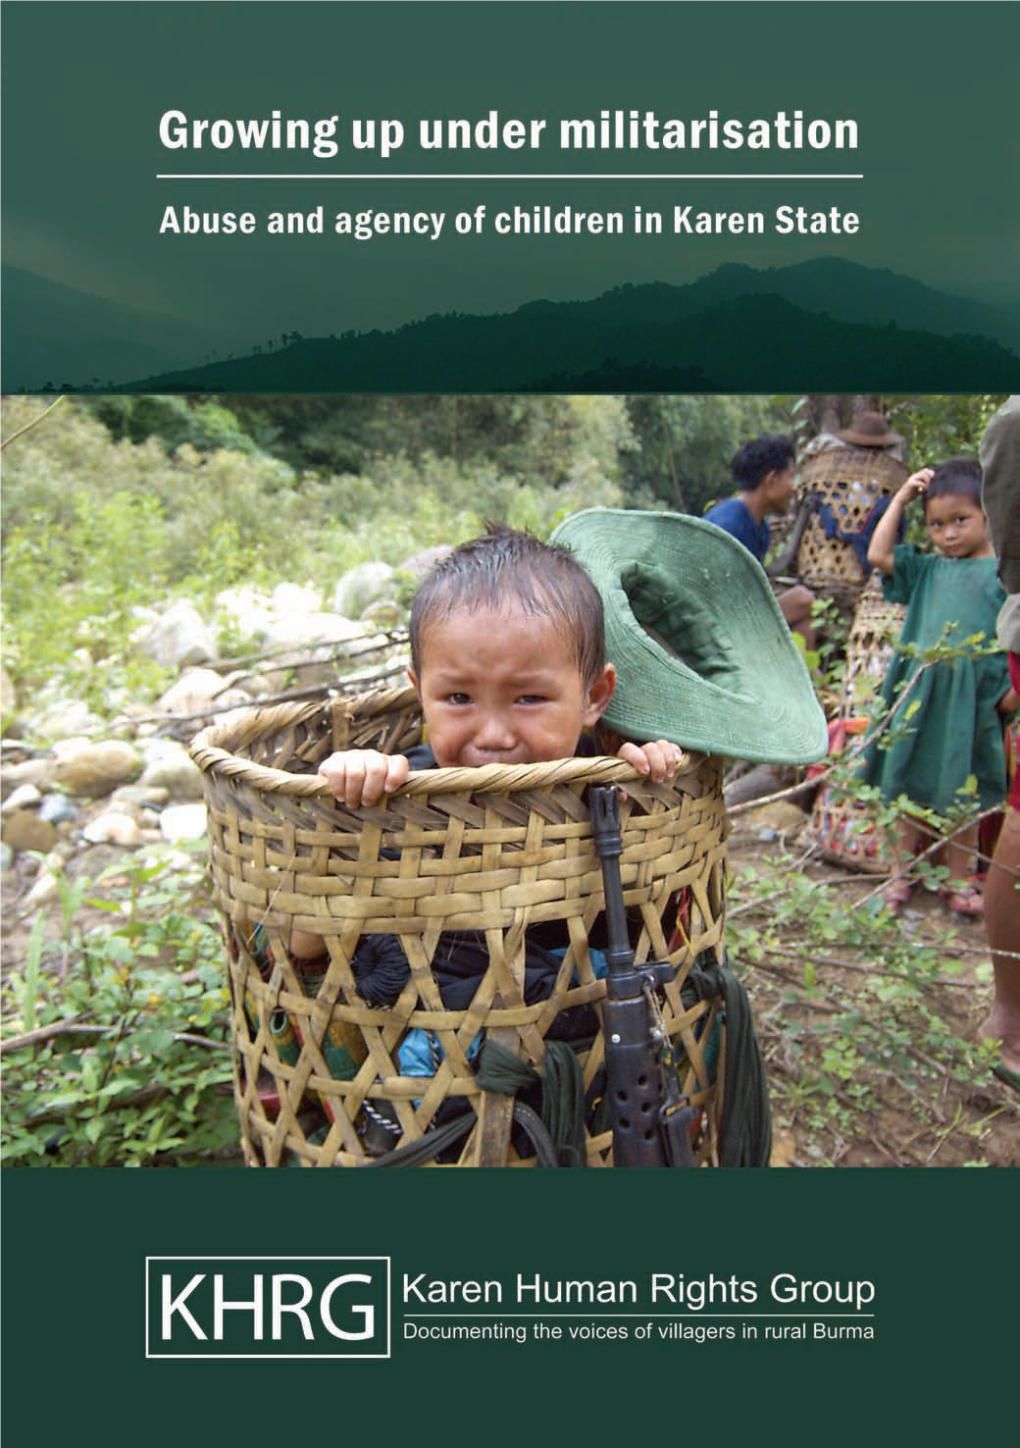 Abuse and Agency of Children in Karen State